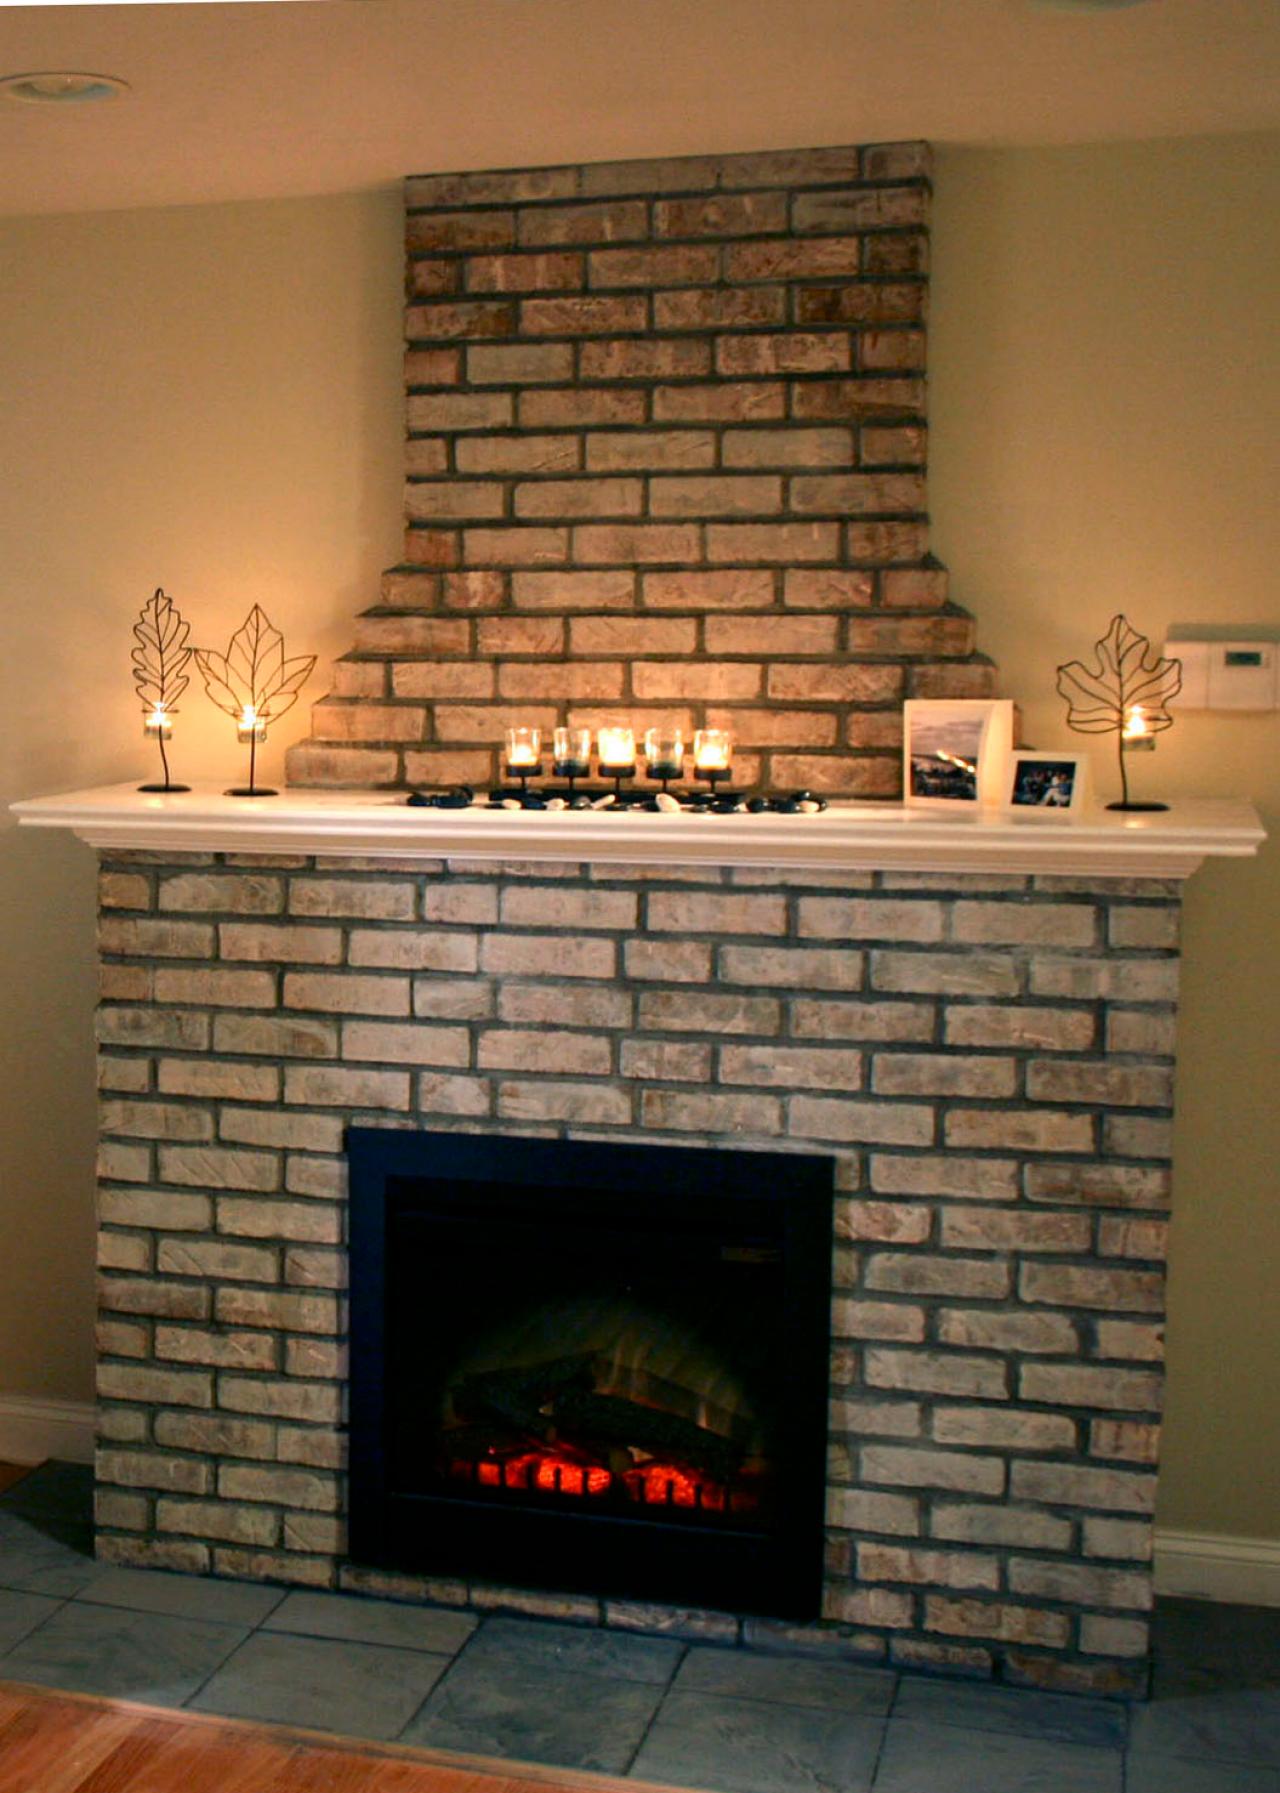 Electric Fireplace With Brick Facade, Are Brick Fireplaces In Style